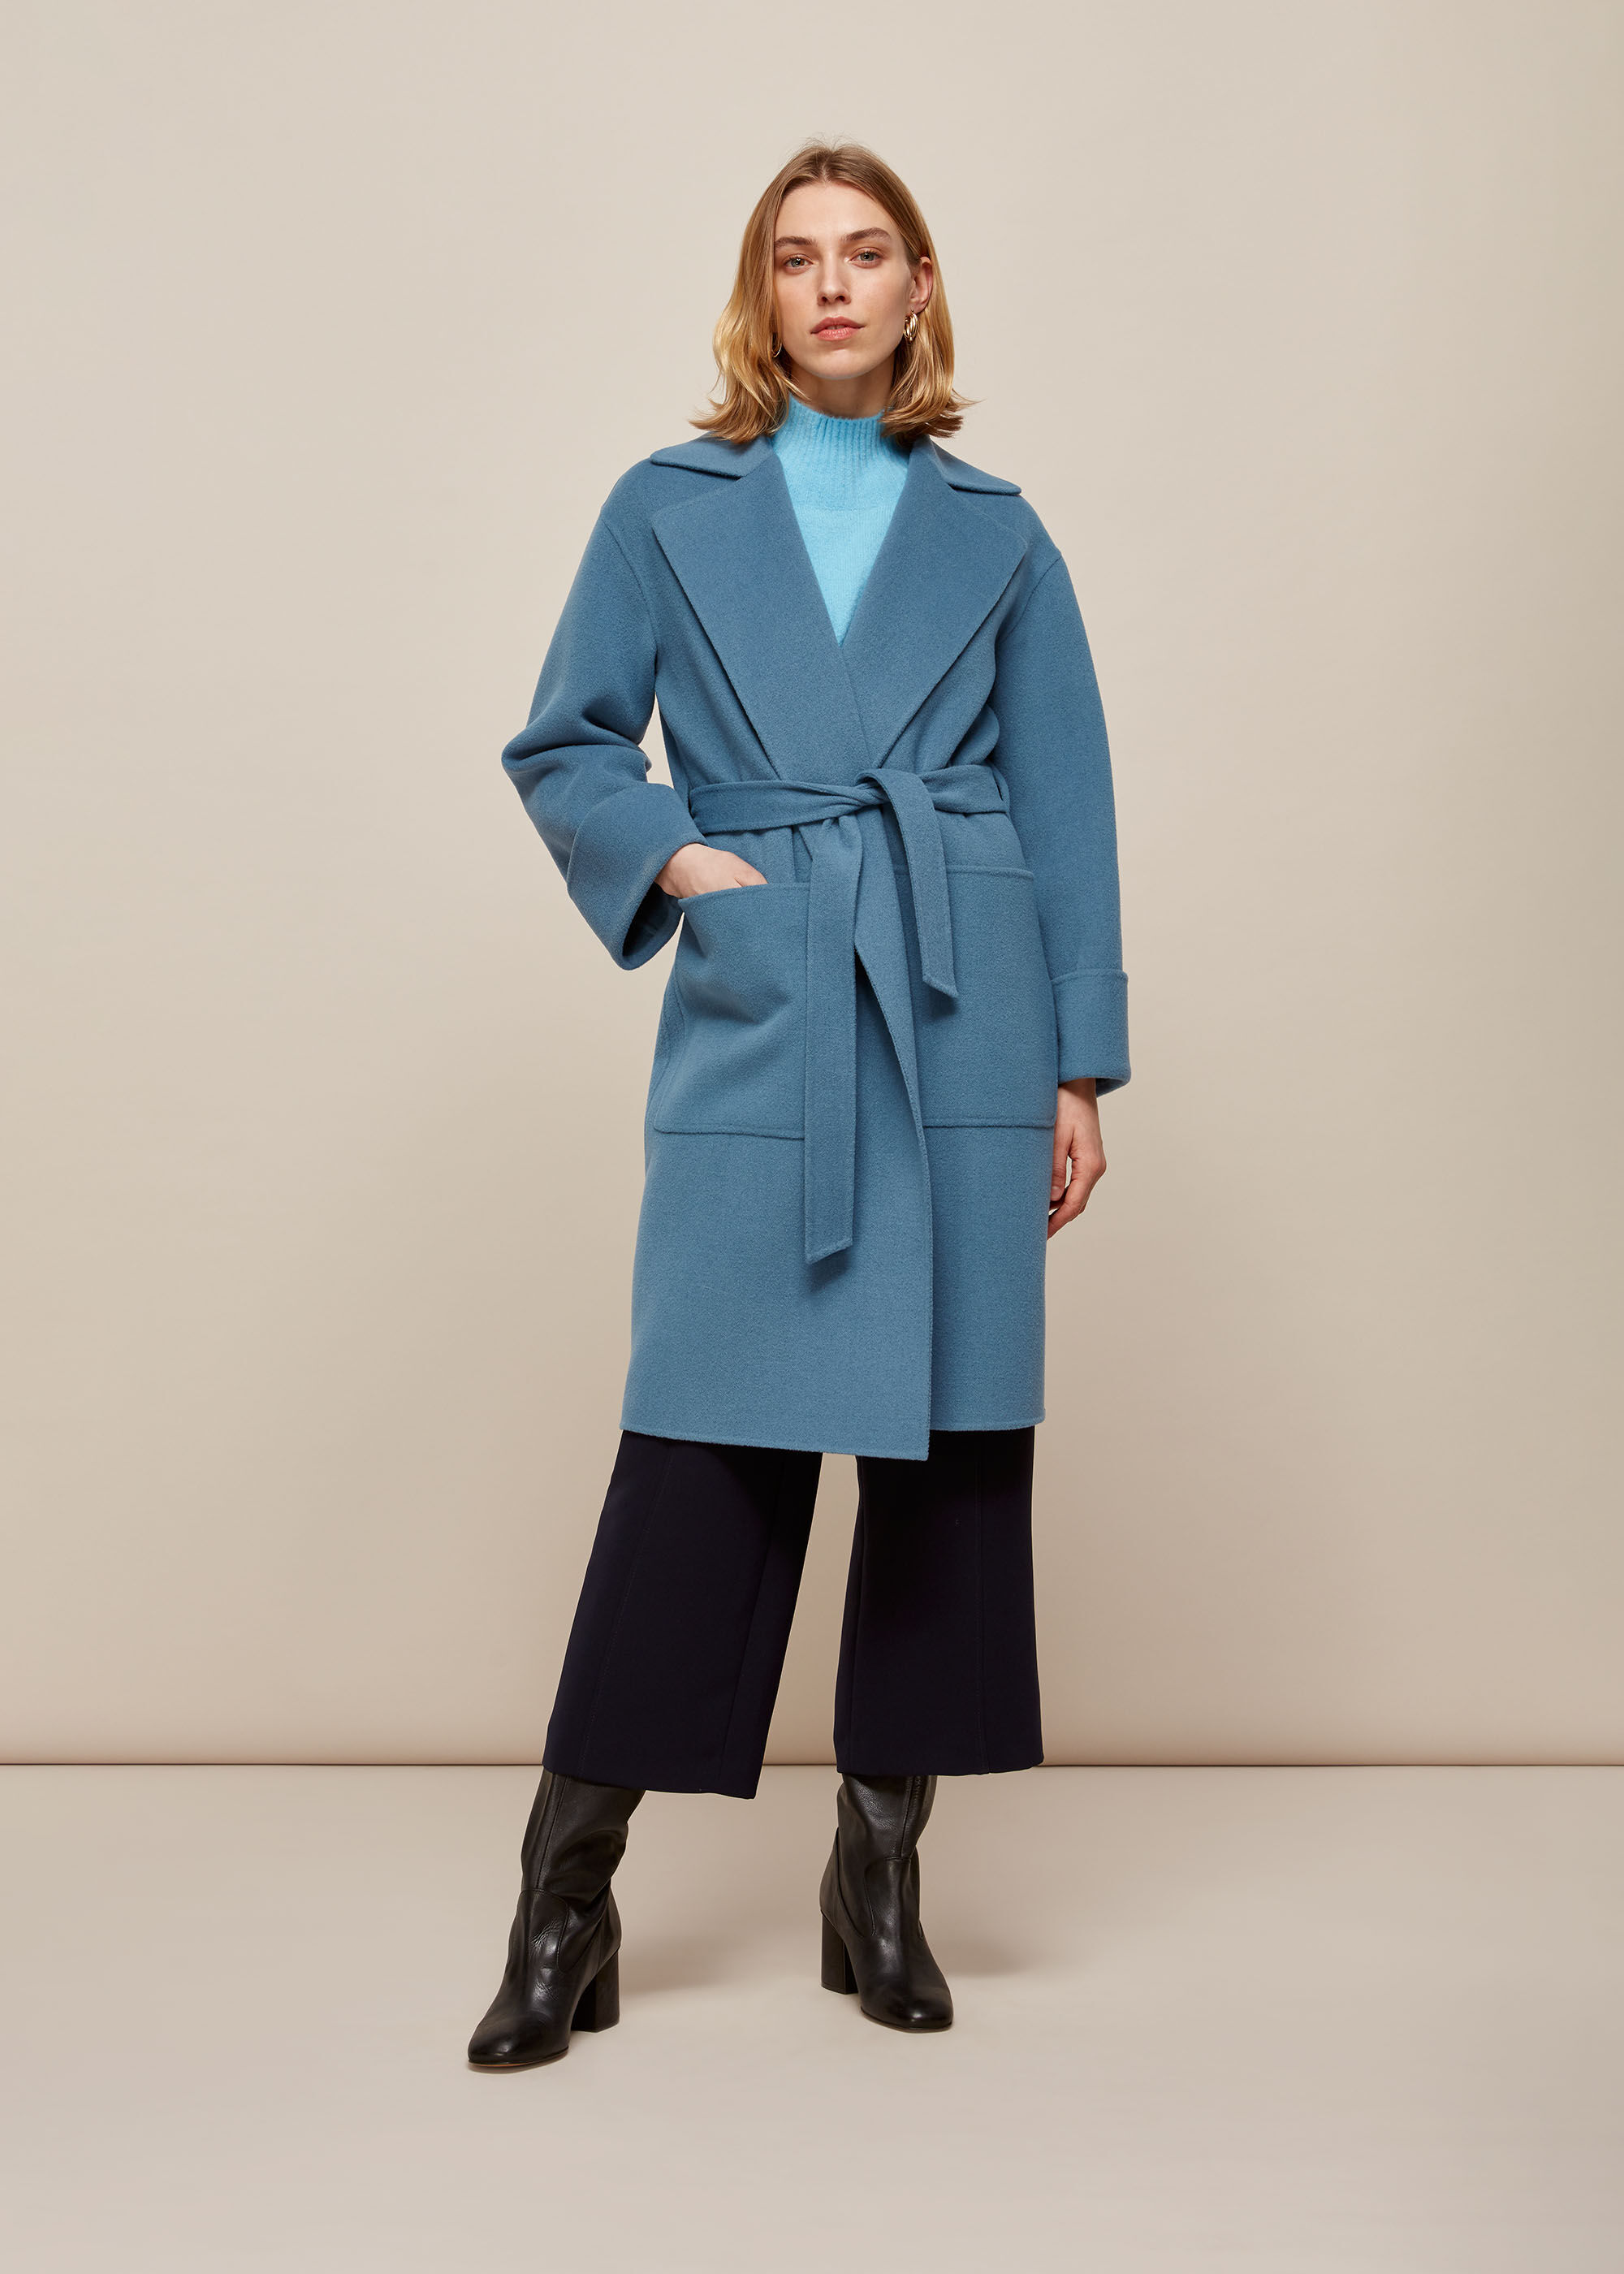 Blue Double Faced Wool Wrap Coat | WHISTLES |